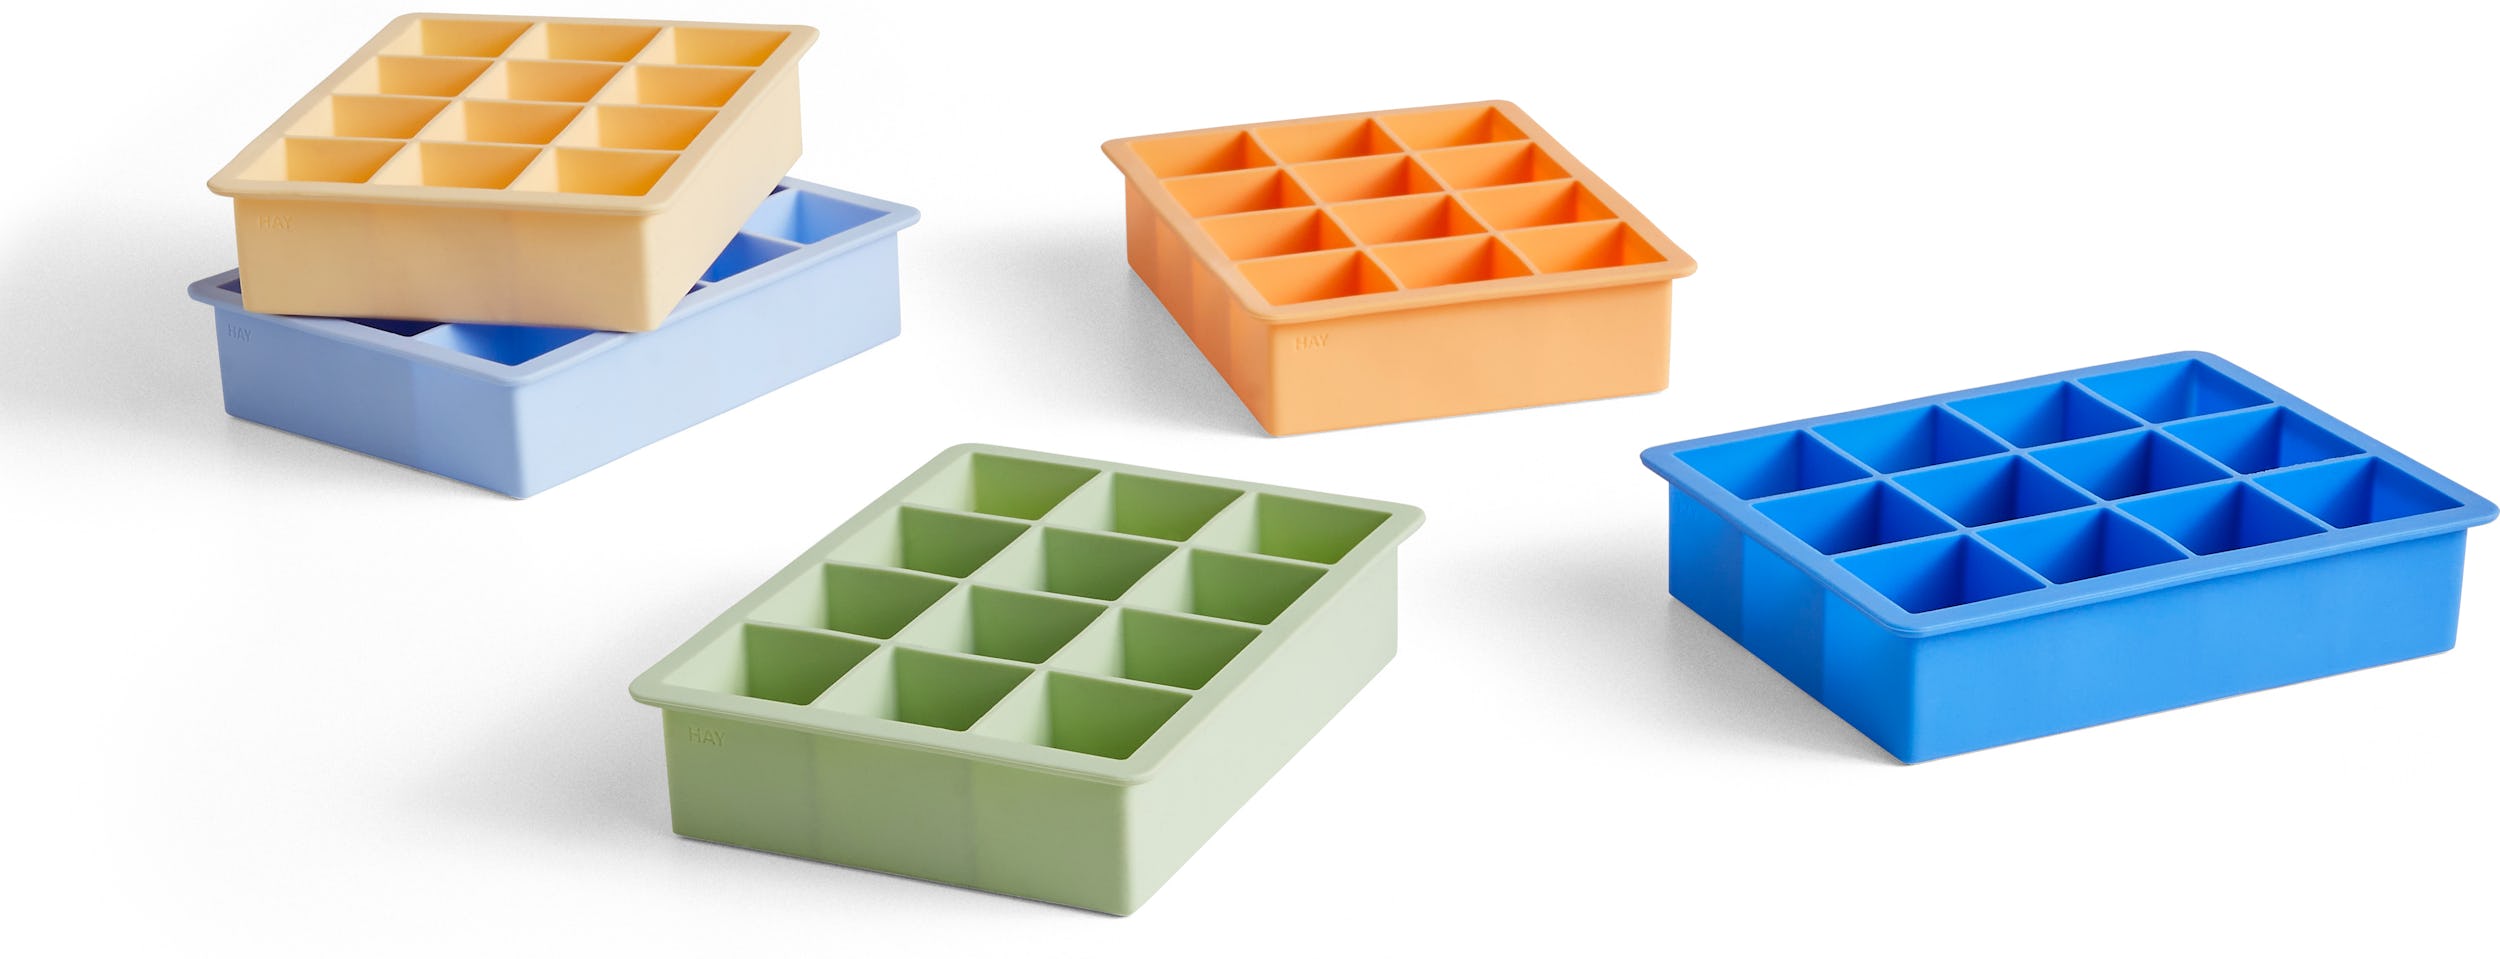 Petal Cocktail Silicone Ice Cube Tray – AIA Store